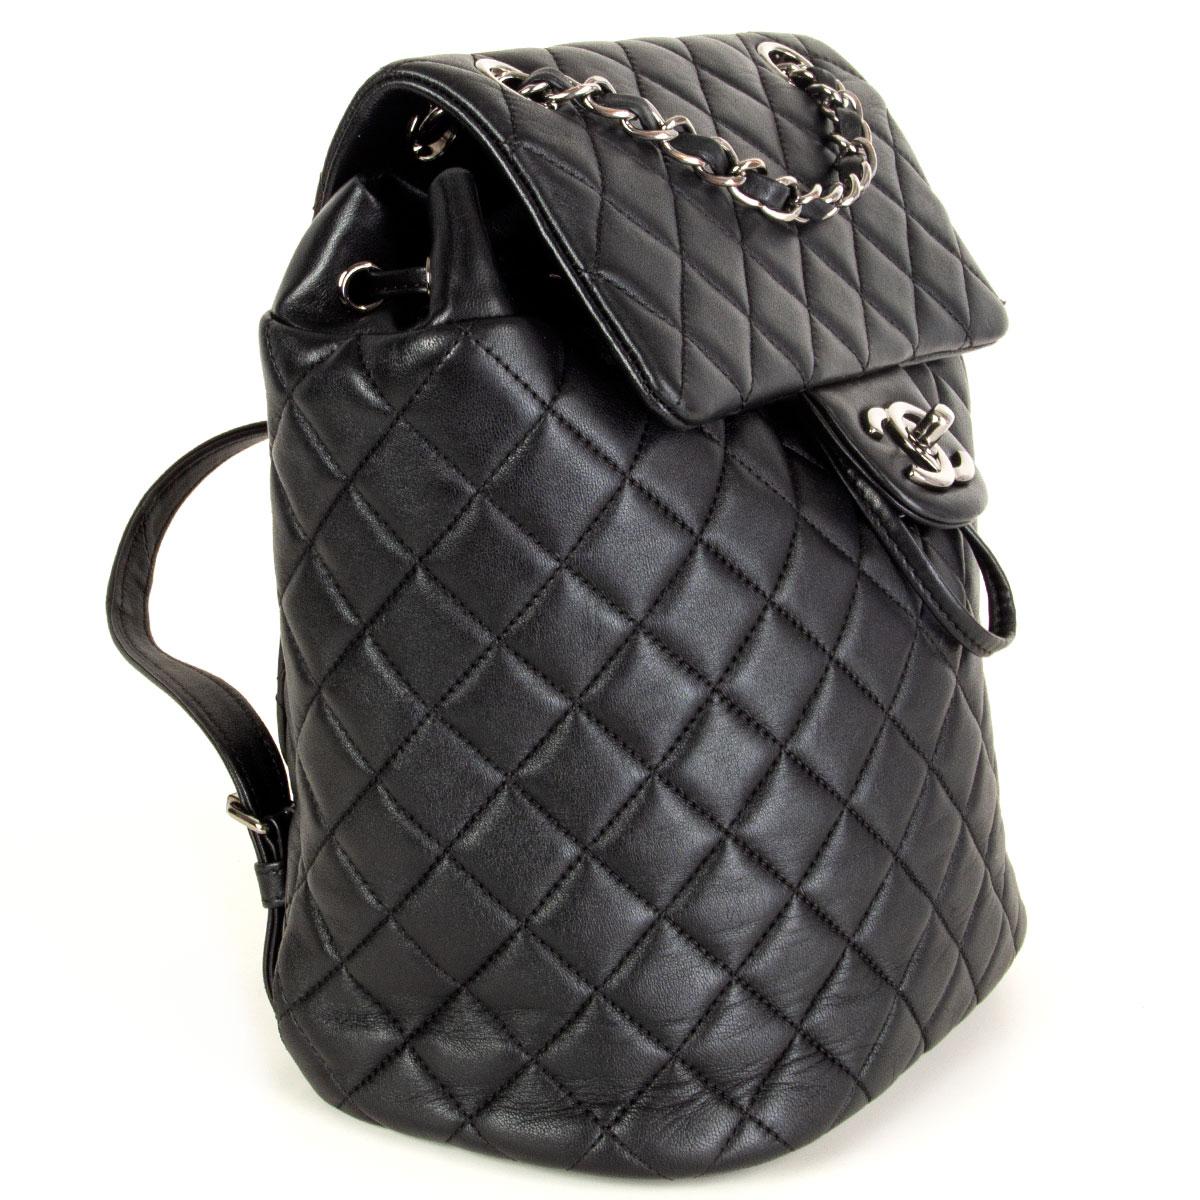 100% authentic Chanel Small Urban Spirit backpack in soft and smooth quilted black lambskin. It features polished dark silver-tone chain link leather threaded shoulder straps. Opens with a flap with a CC logo turn lock and leather drawstring to a